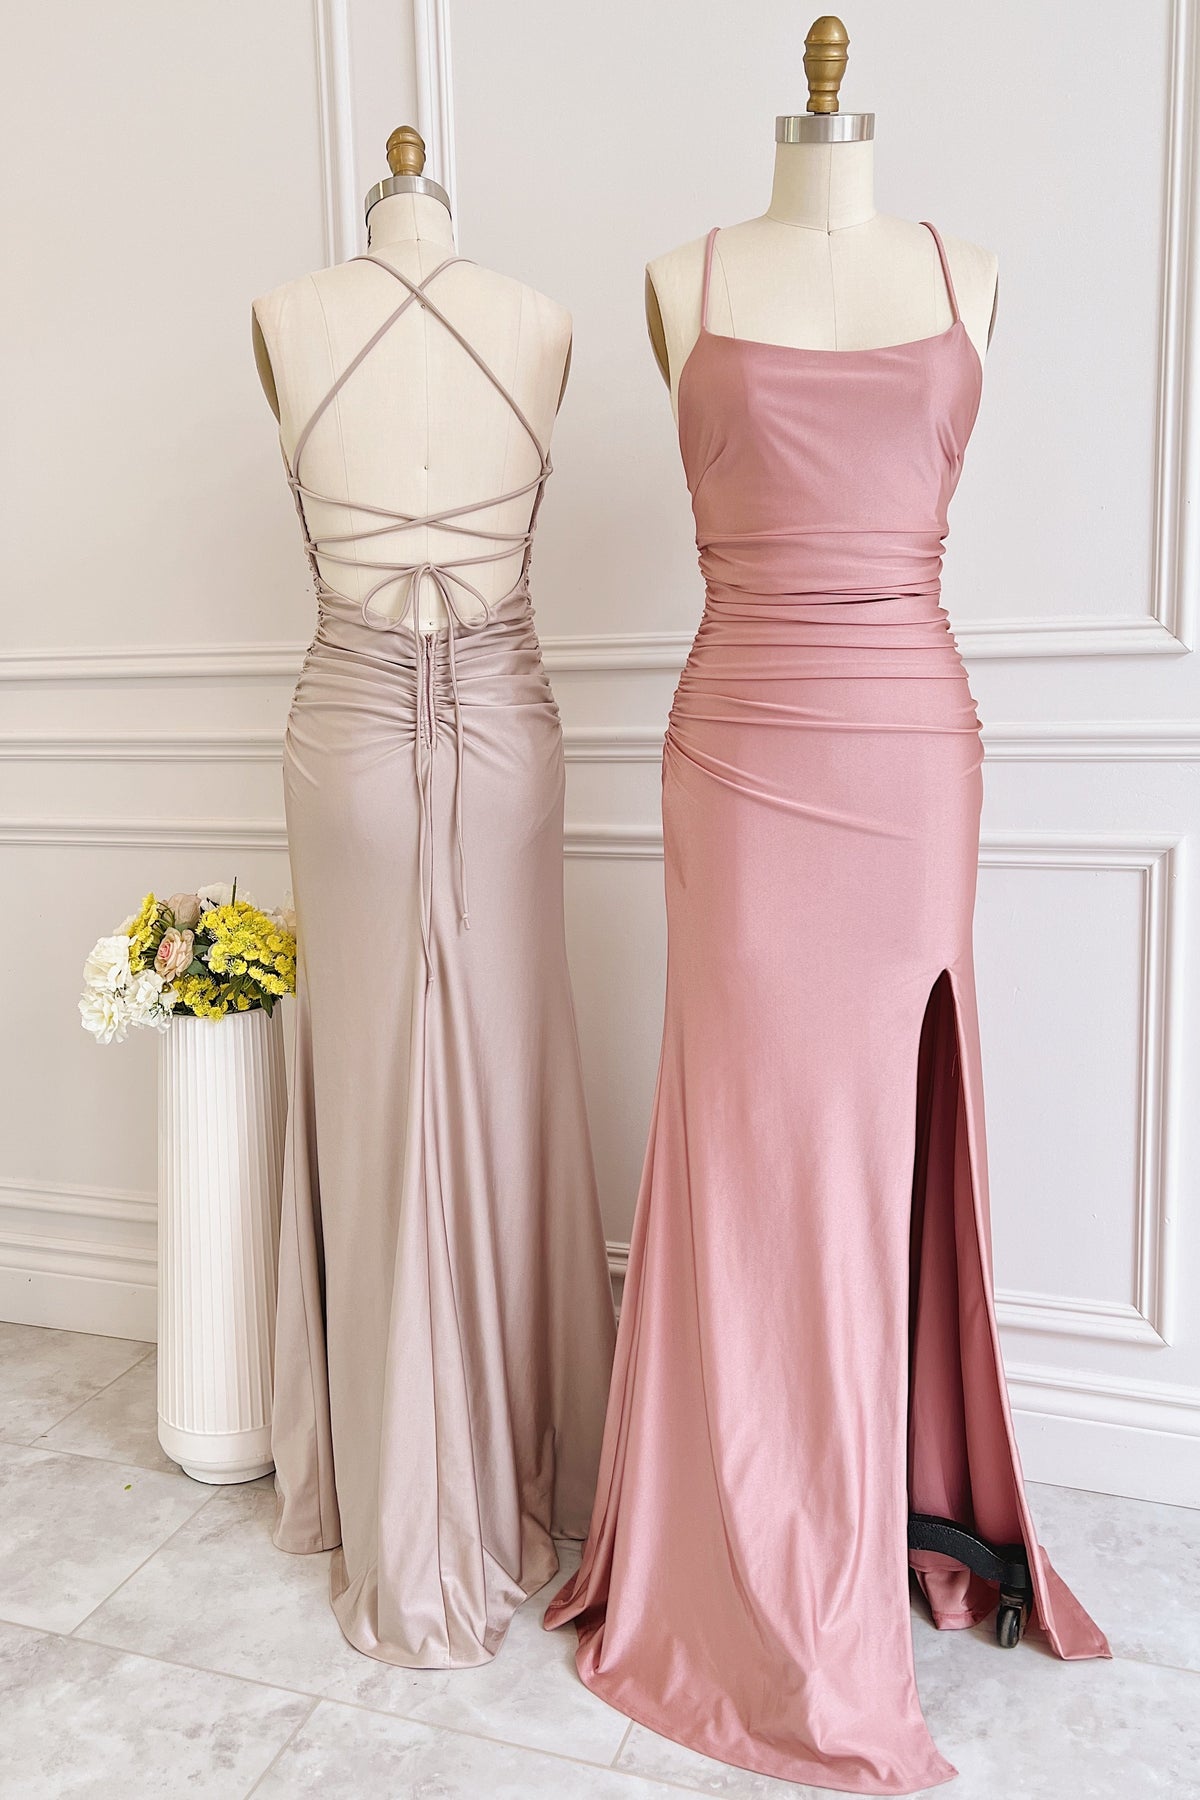 Dusty Pink Satin Lace-Up Sheath Long Bridesmaid Dress with Slit